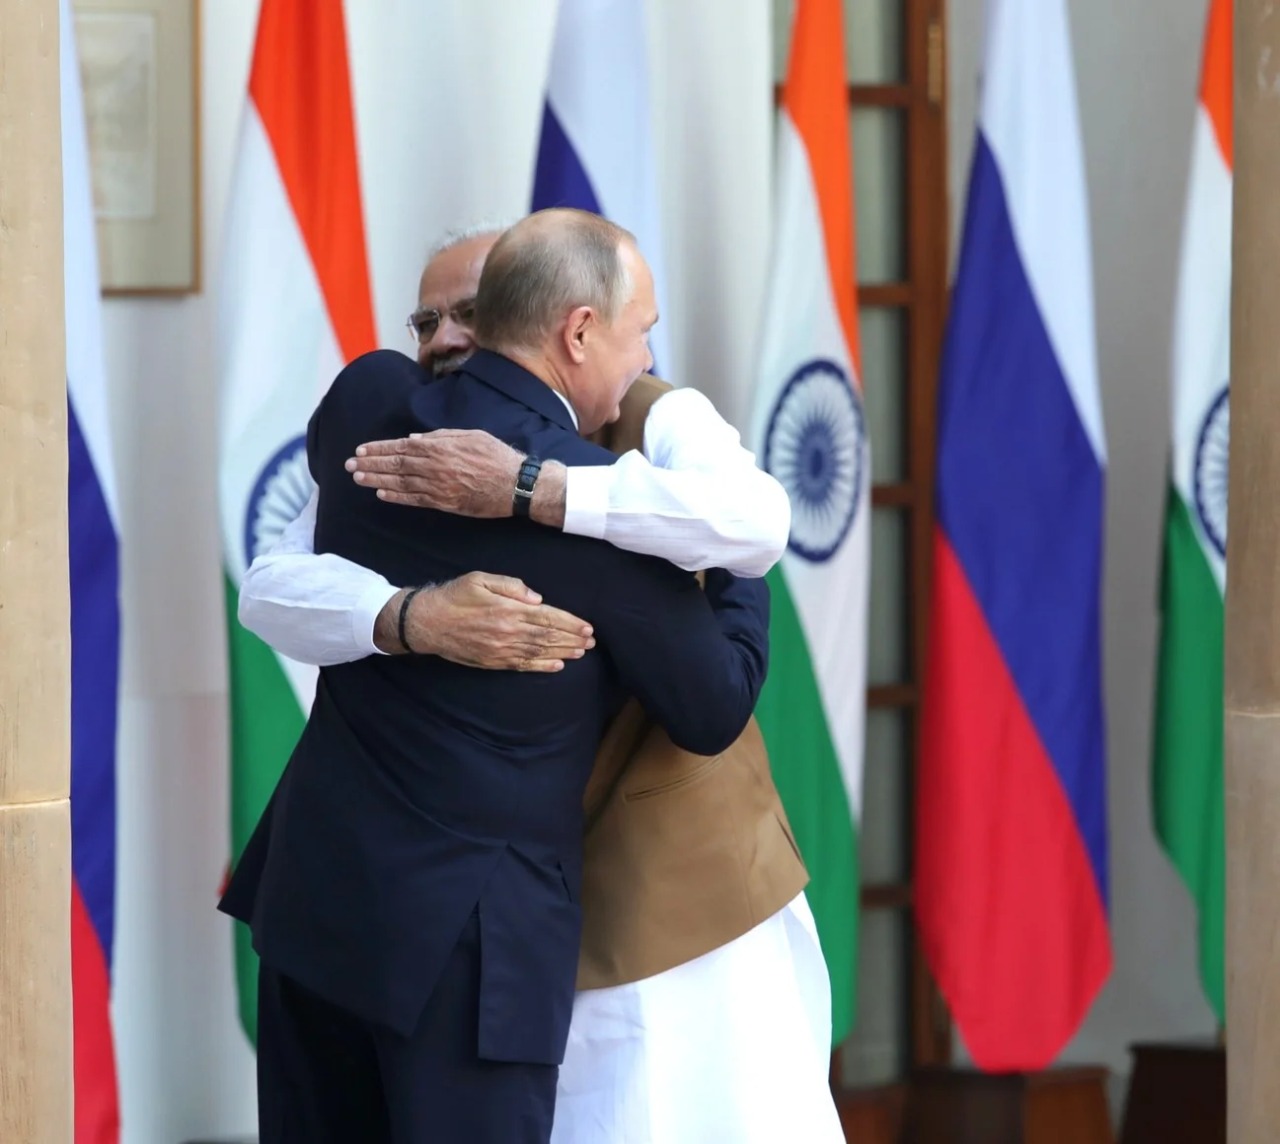 India has gained a lot of prestige on the world stage Happy Independence Day to Putin